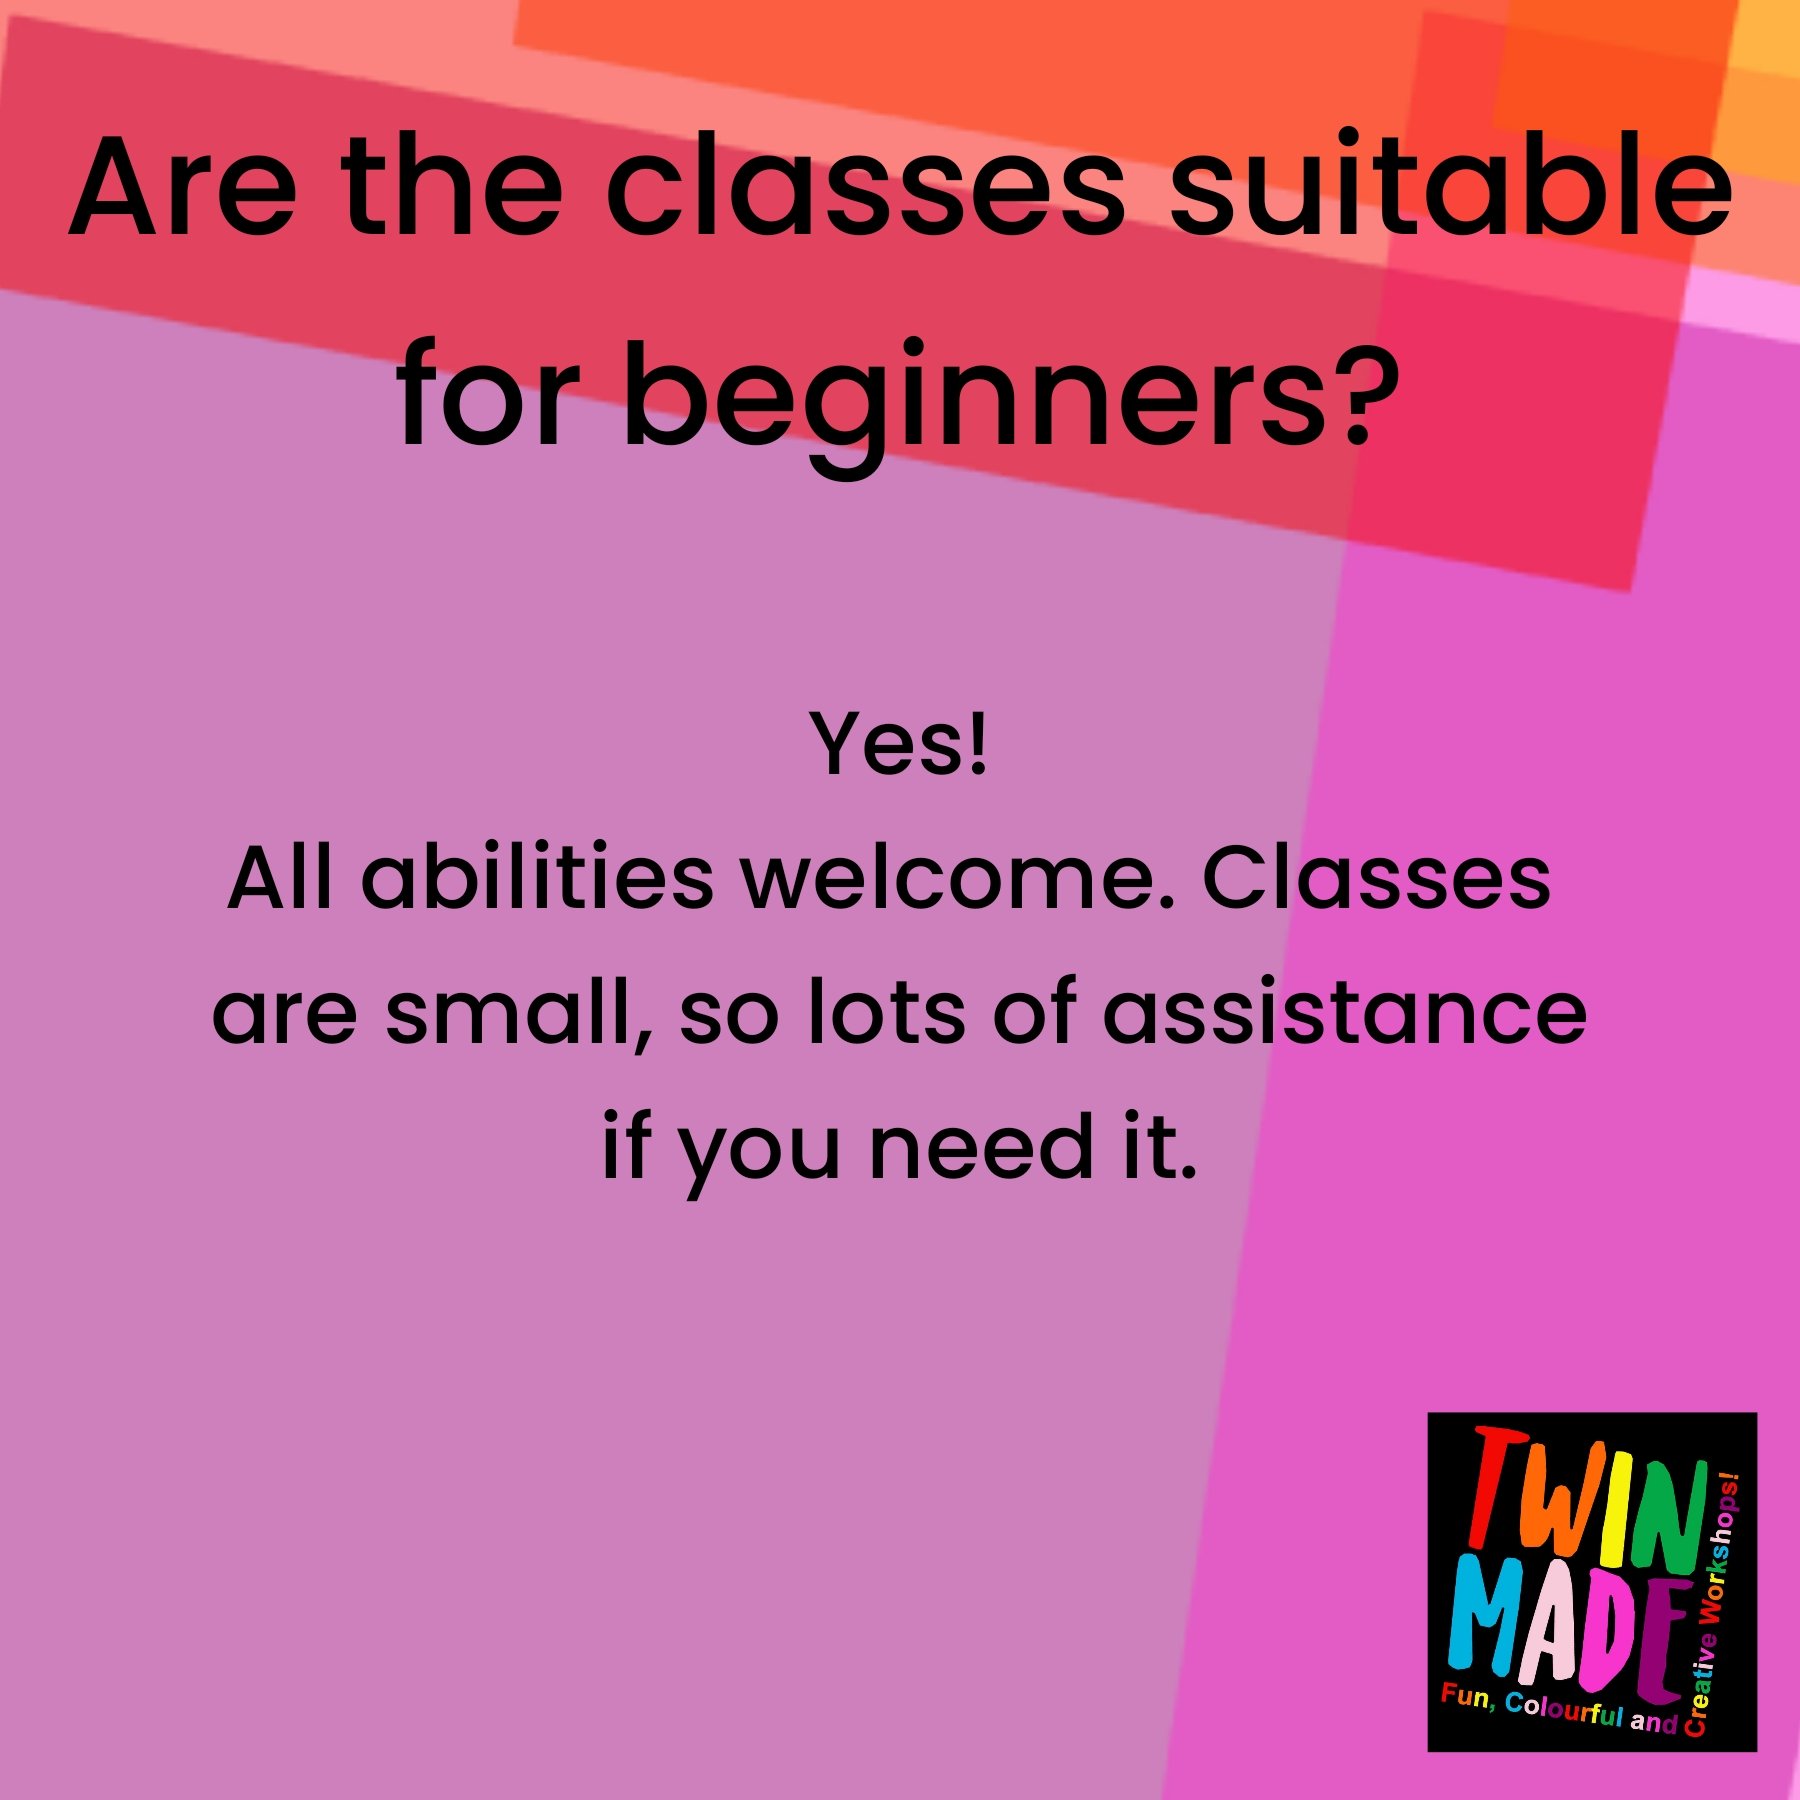 Are the classes suitable for beginners?